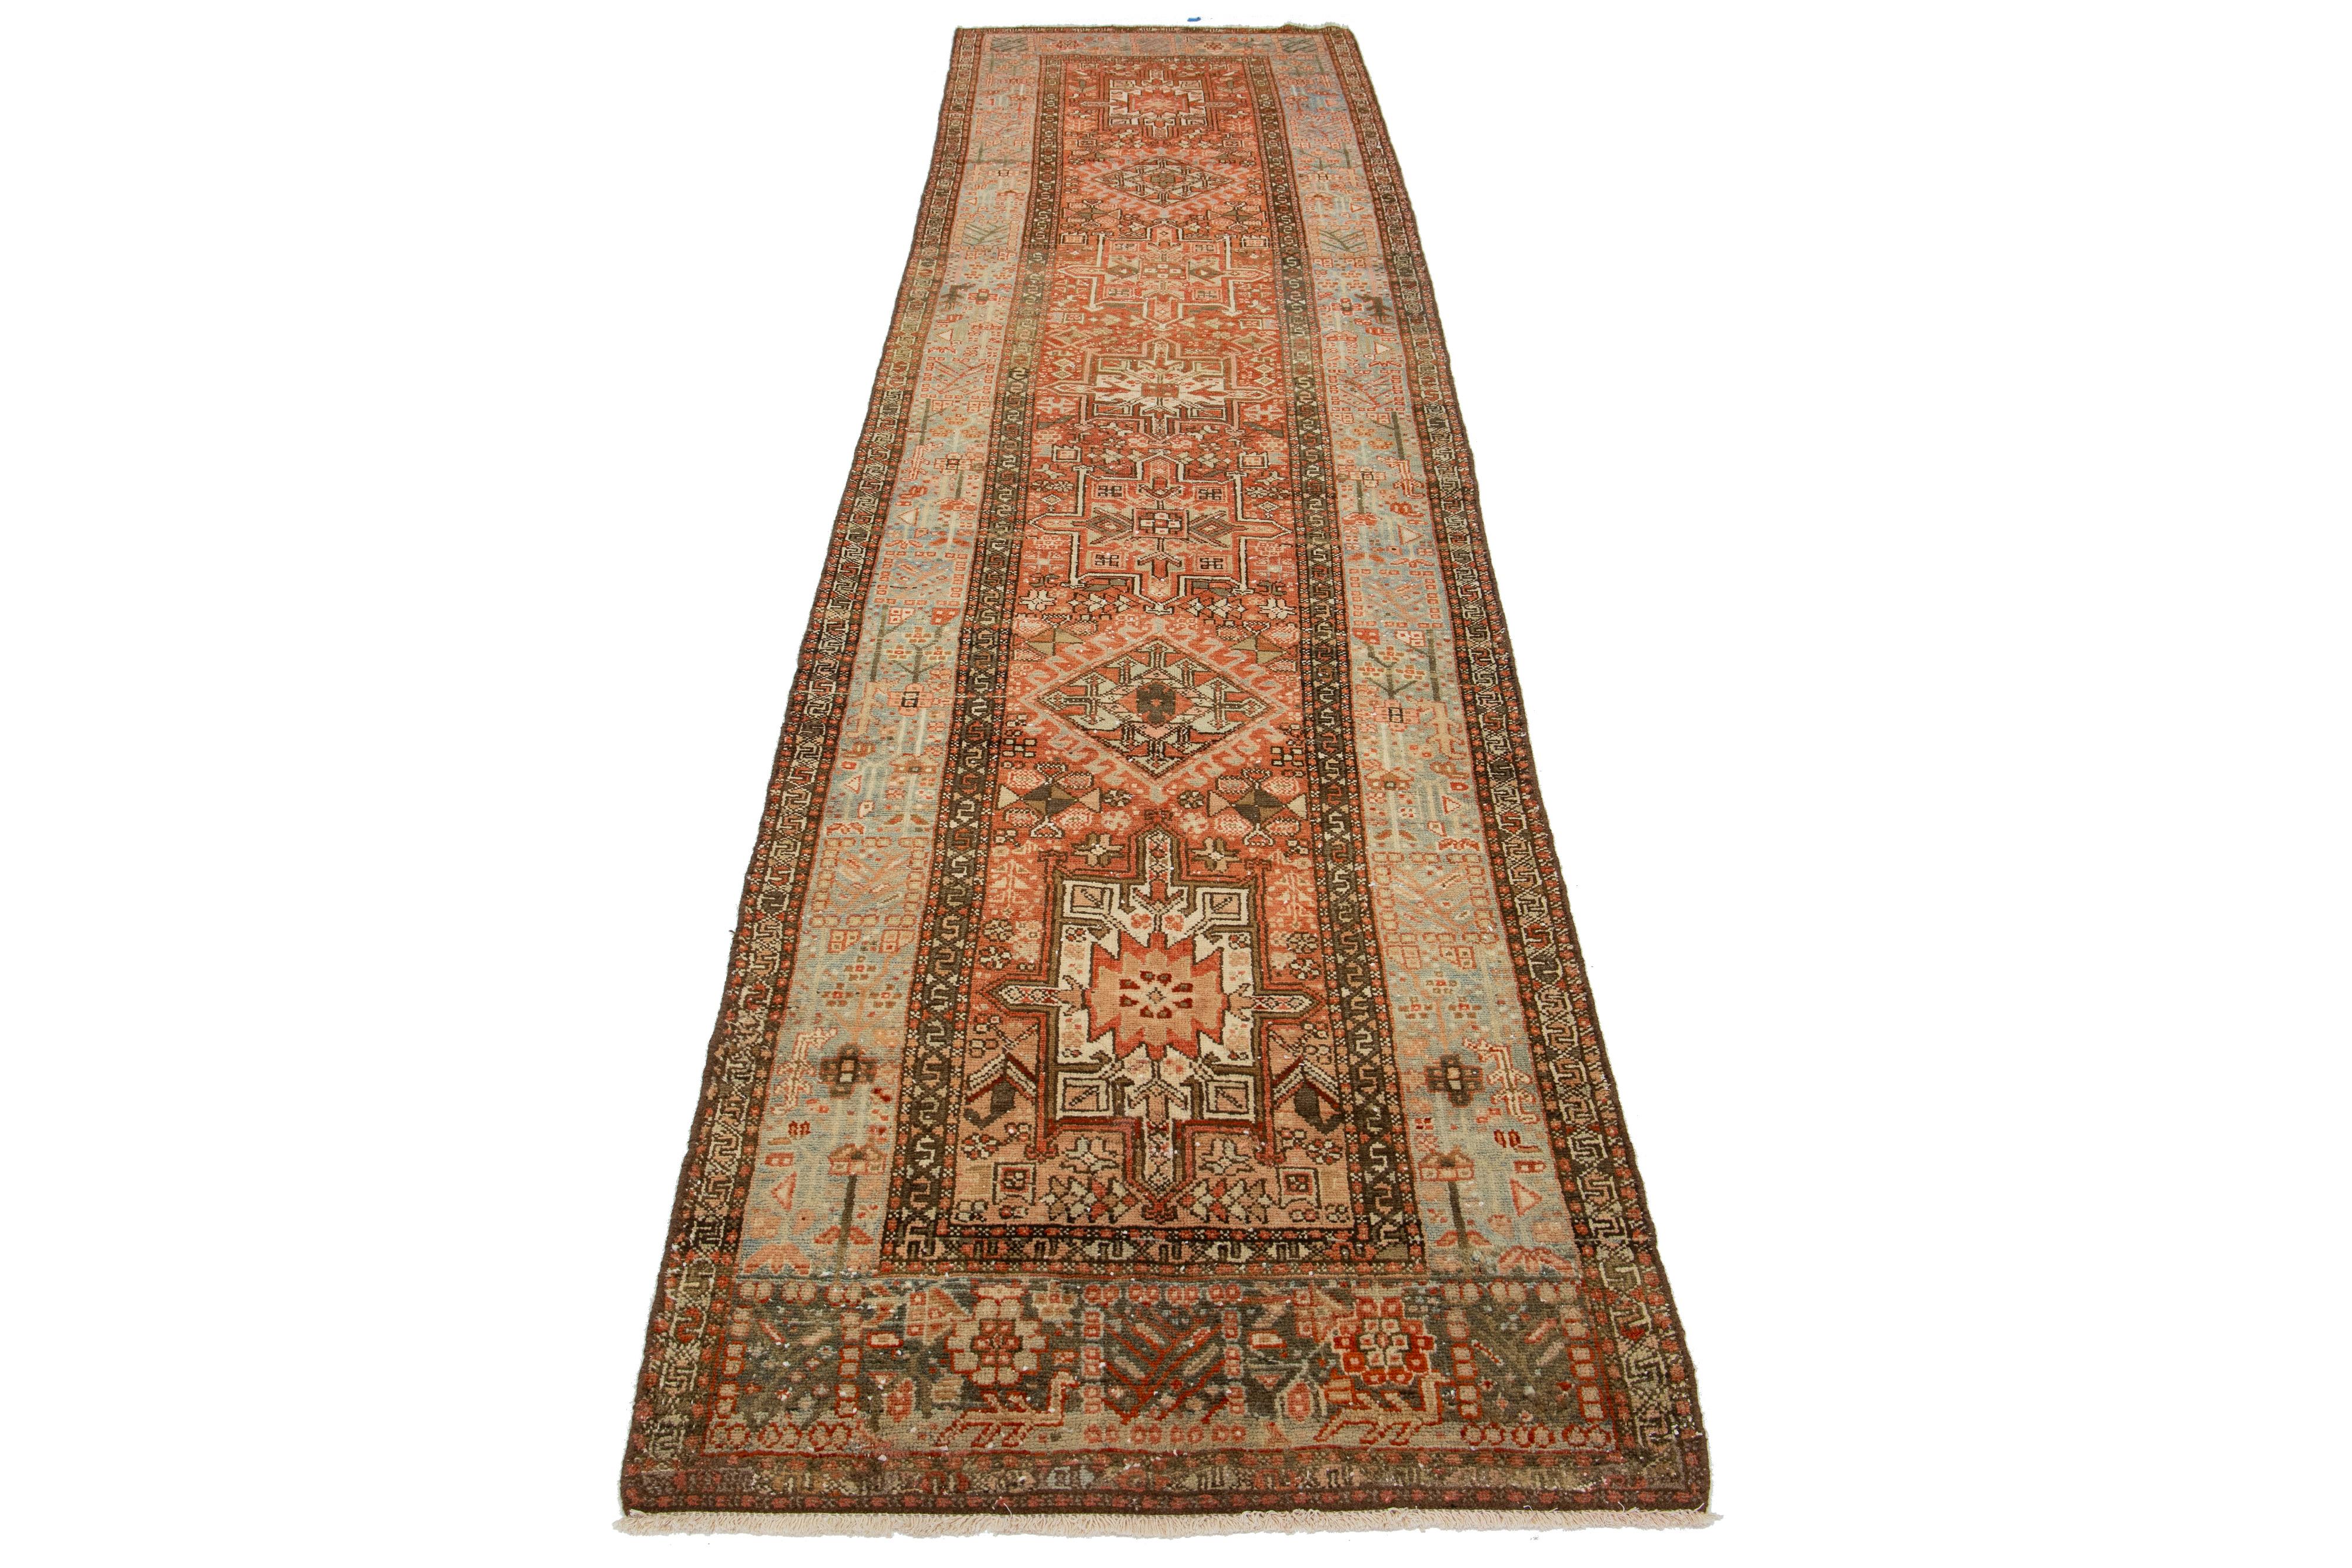 This beautiful 20th-century Heriz hand-knotted wool runner has a rust-colored field. The piece features stunning blue and brown accents in a gorgeous tribal design.

This rug measures 3'4